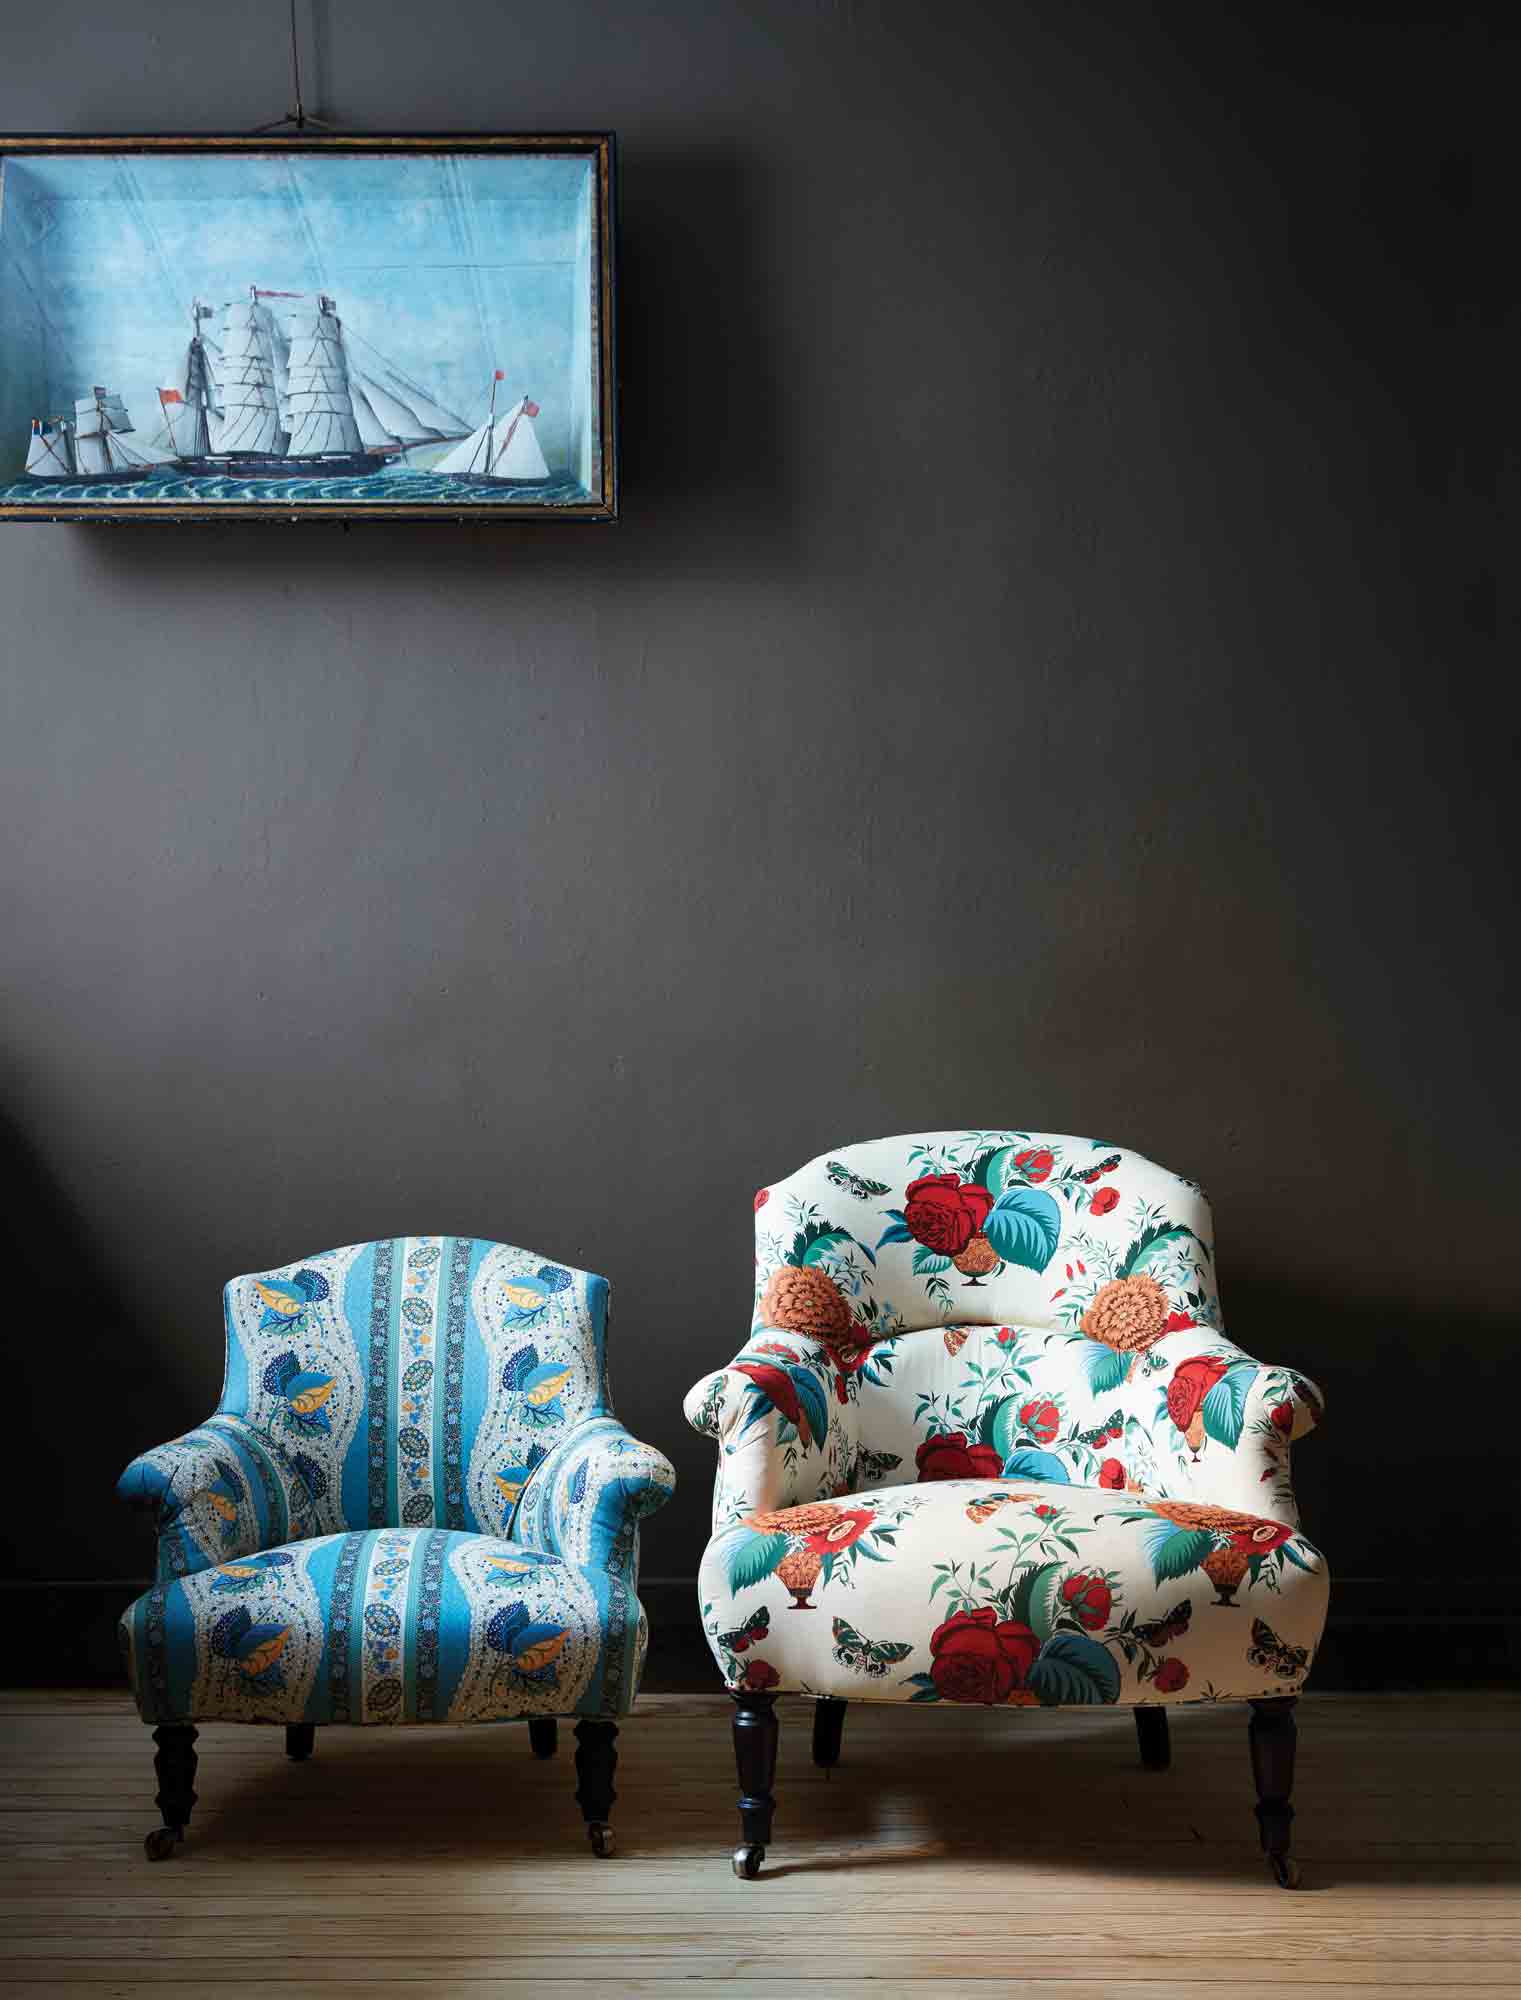  Tulip chair in John Derian Fabric next to a print chair. In the background is a dark wall with a ship in the water art piece. Photographed in John Derian fabric. 